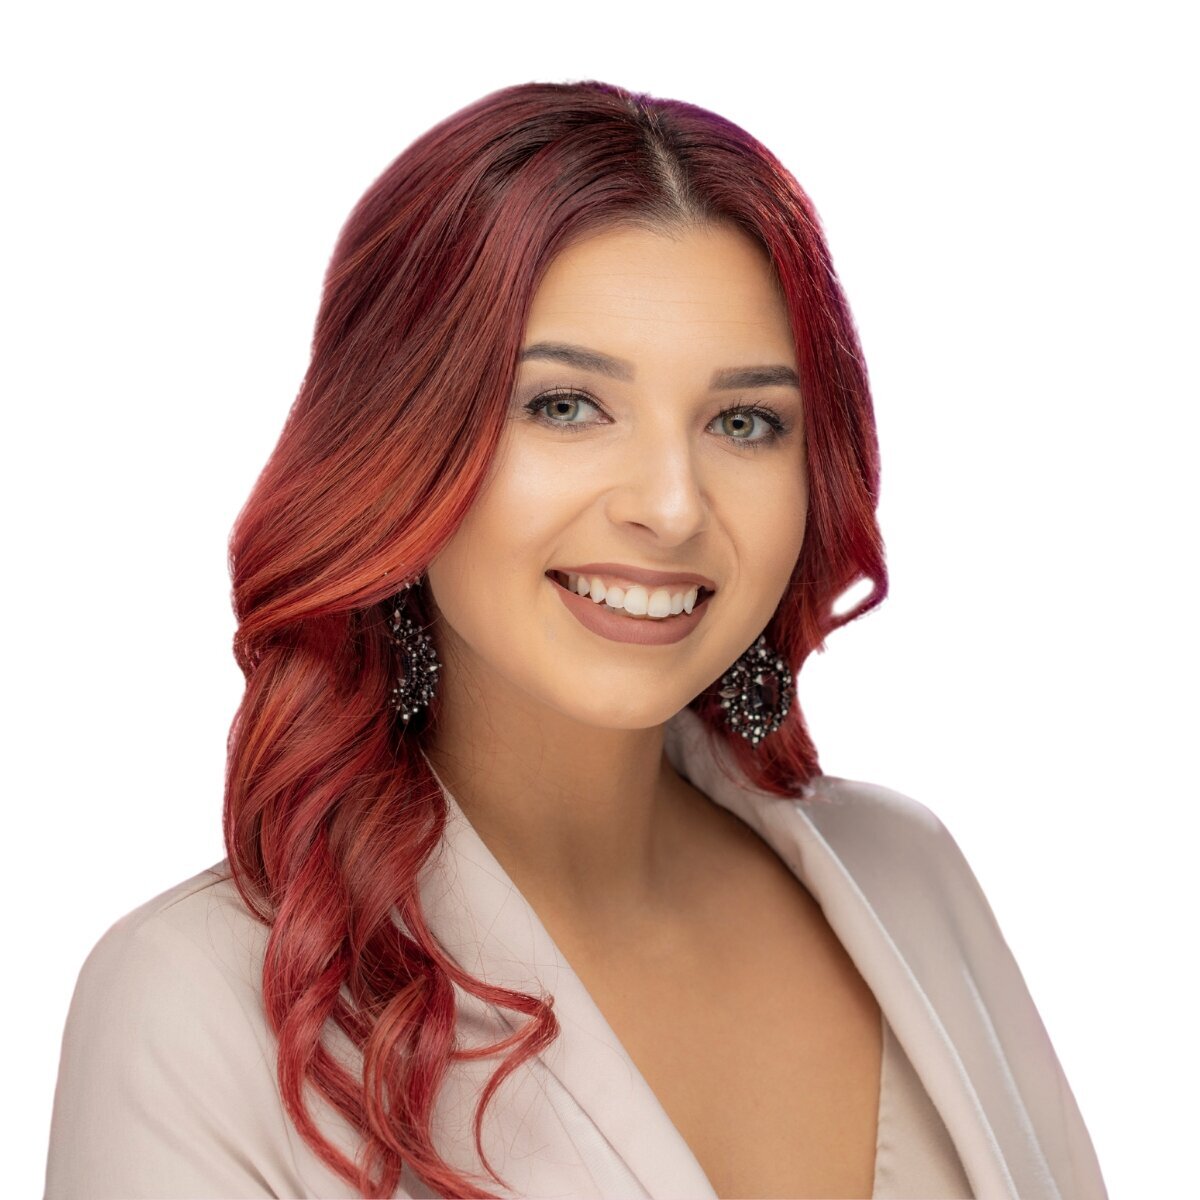 Stylish woman with bright died red wavy hair smiles at camera in business attire for a professional sacramento headshot.